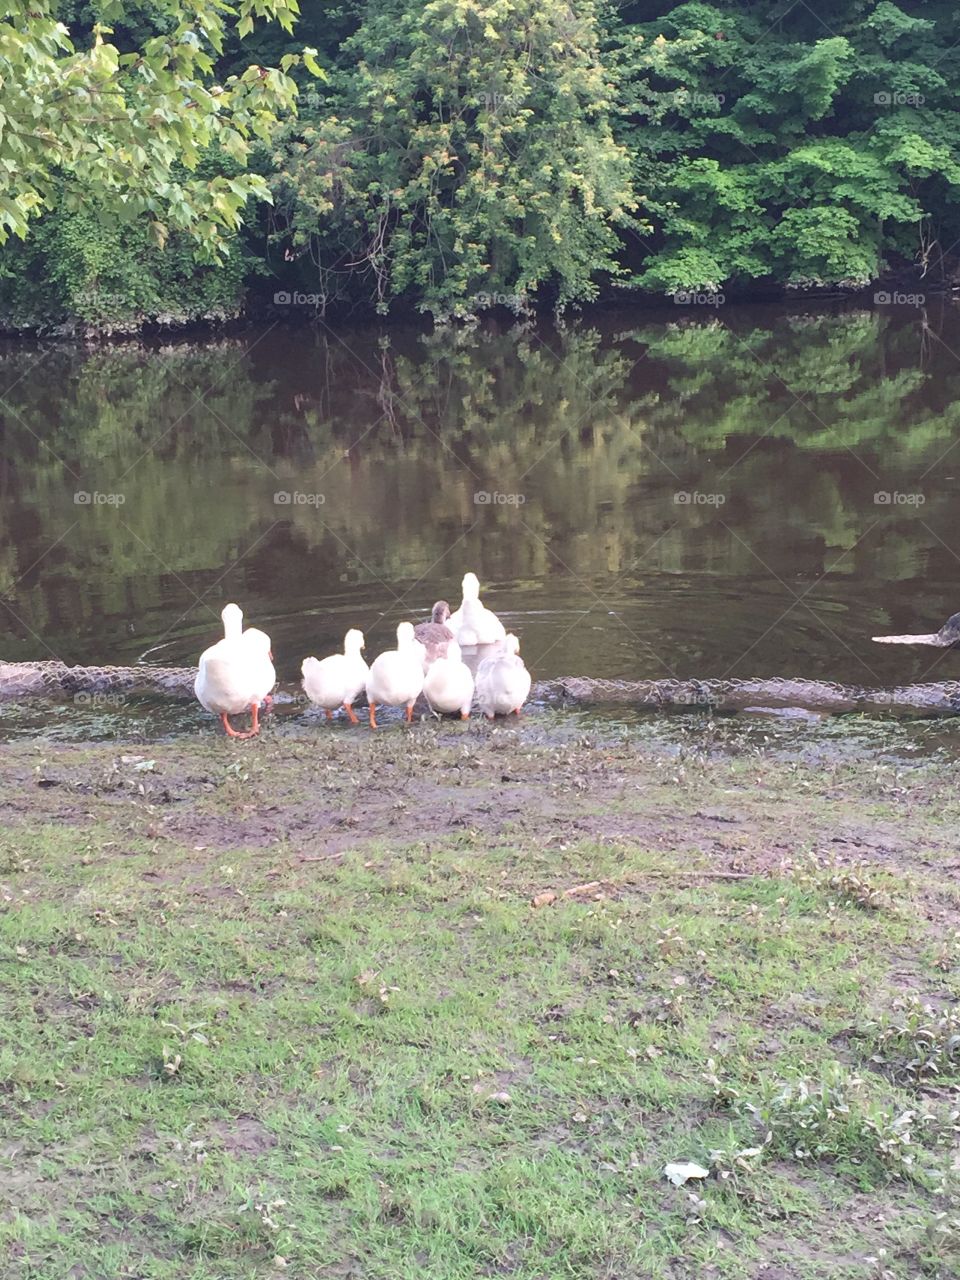 Some ducks tuning to the water with their family 